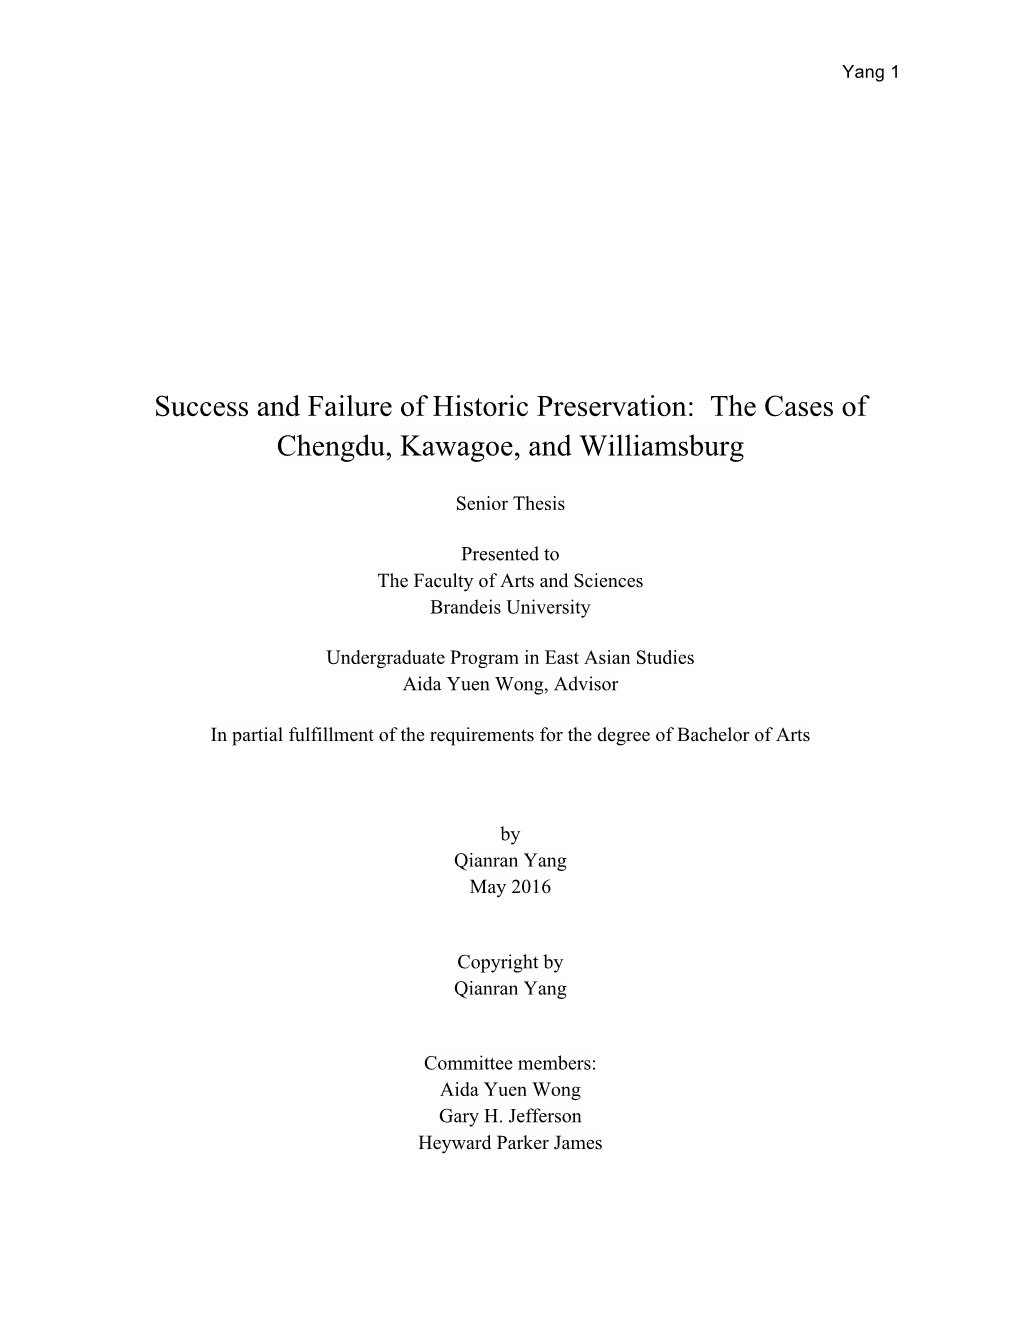 Success and Failure of Historic Preservation: the Cases of Chengdu, Kawagoe, and Williamsburg